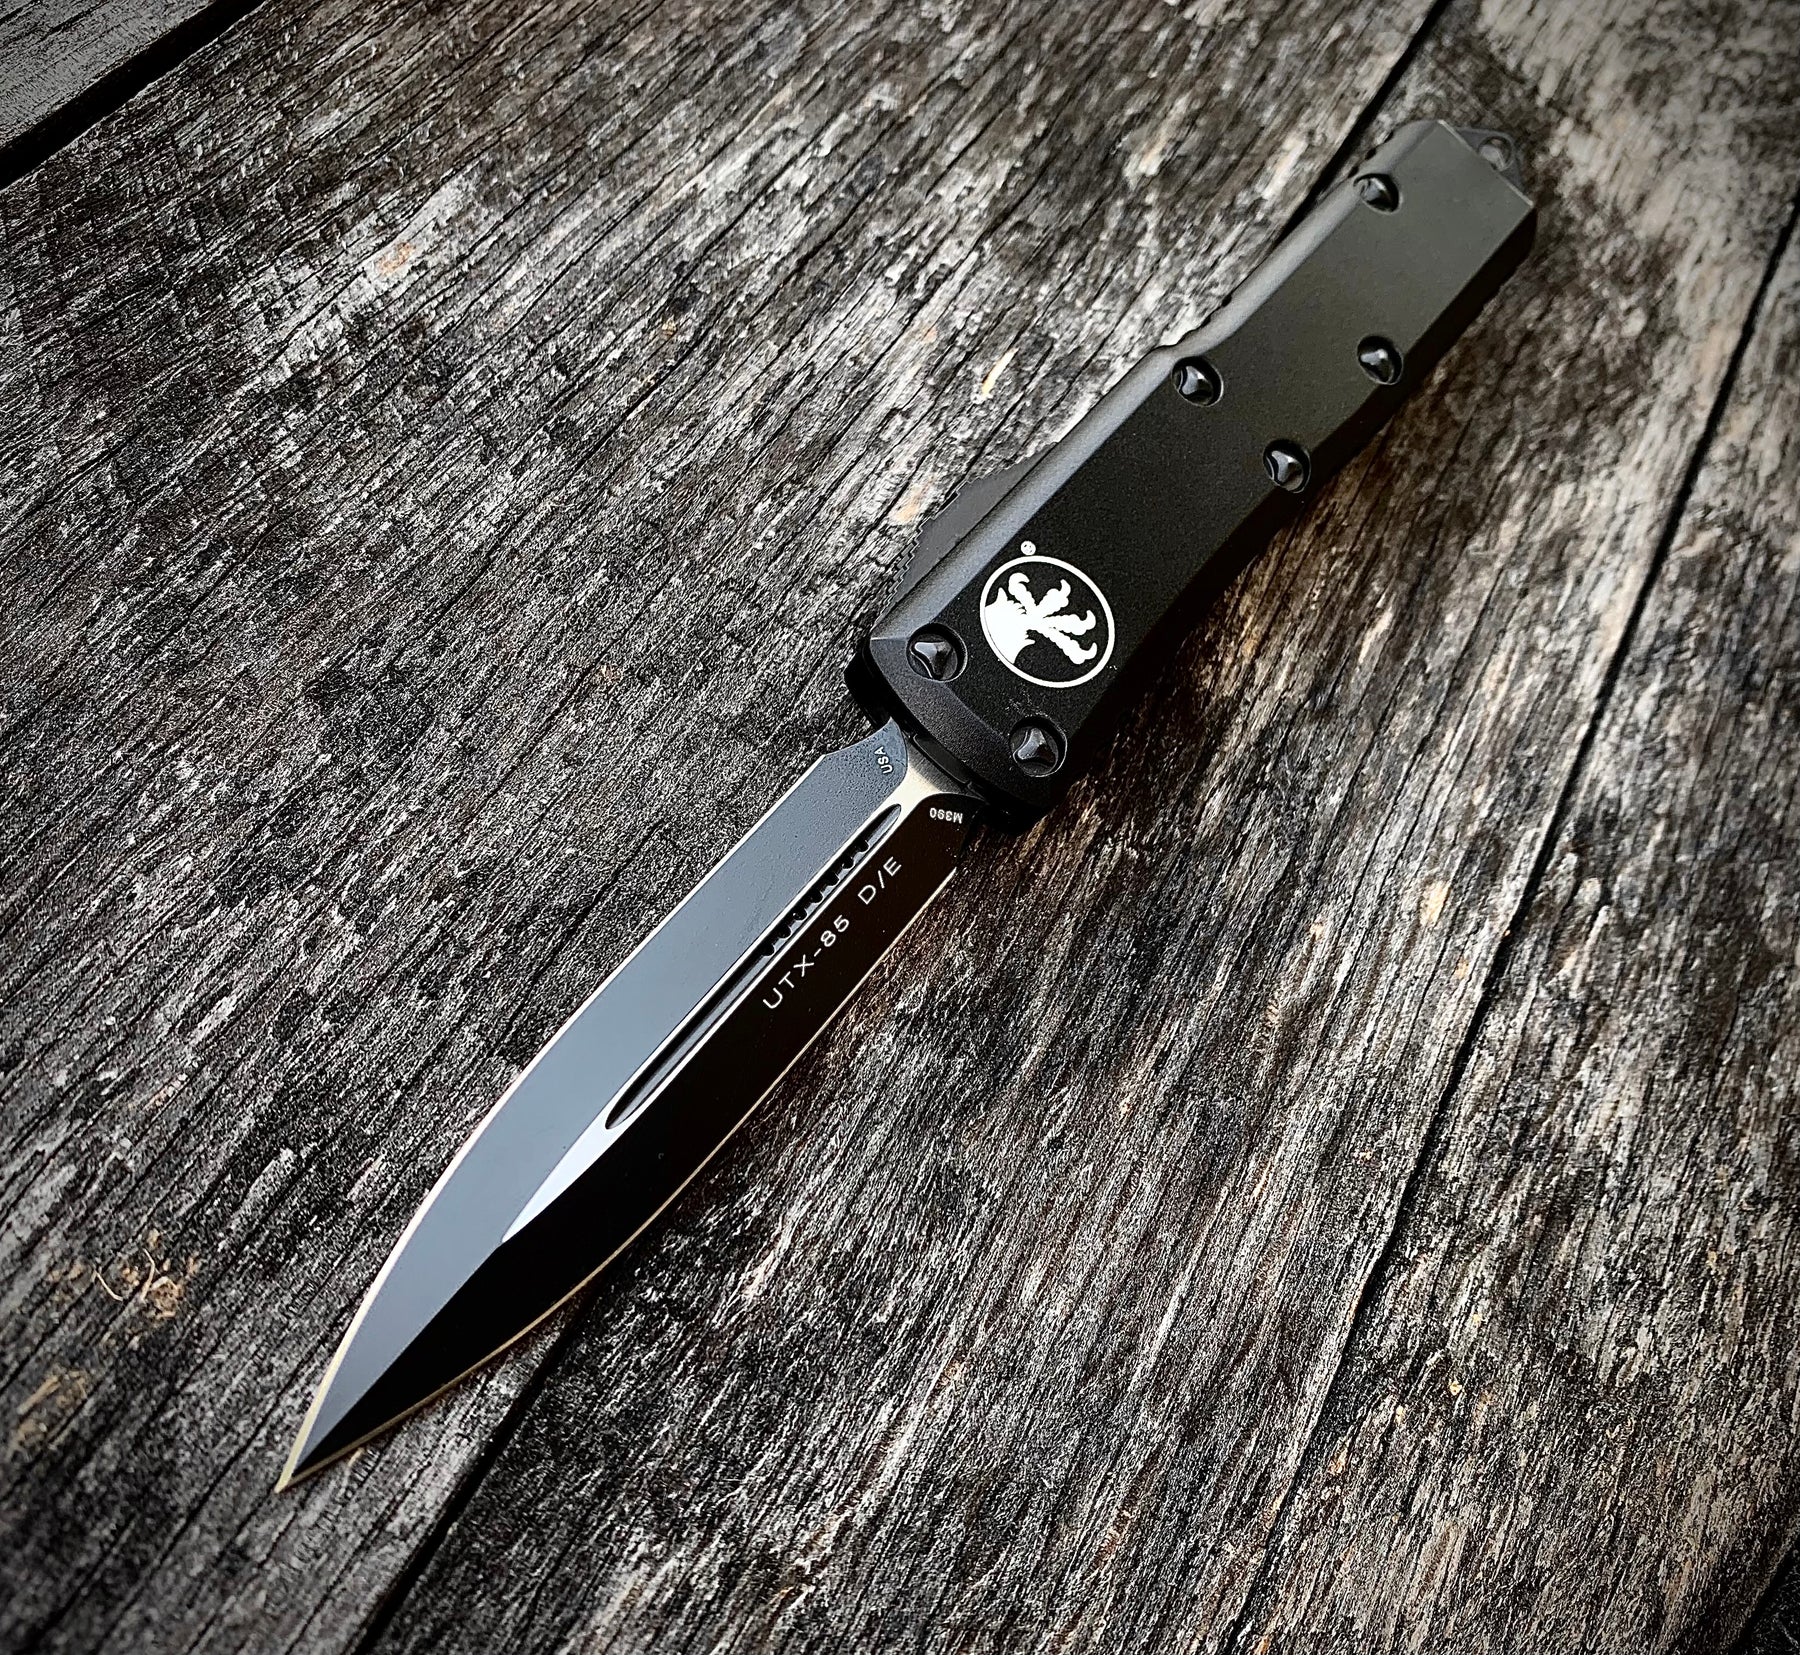 The Best Features of Microtech Knives